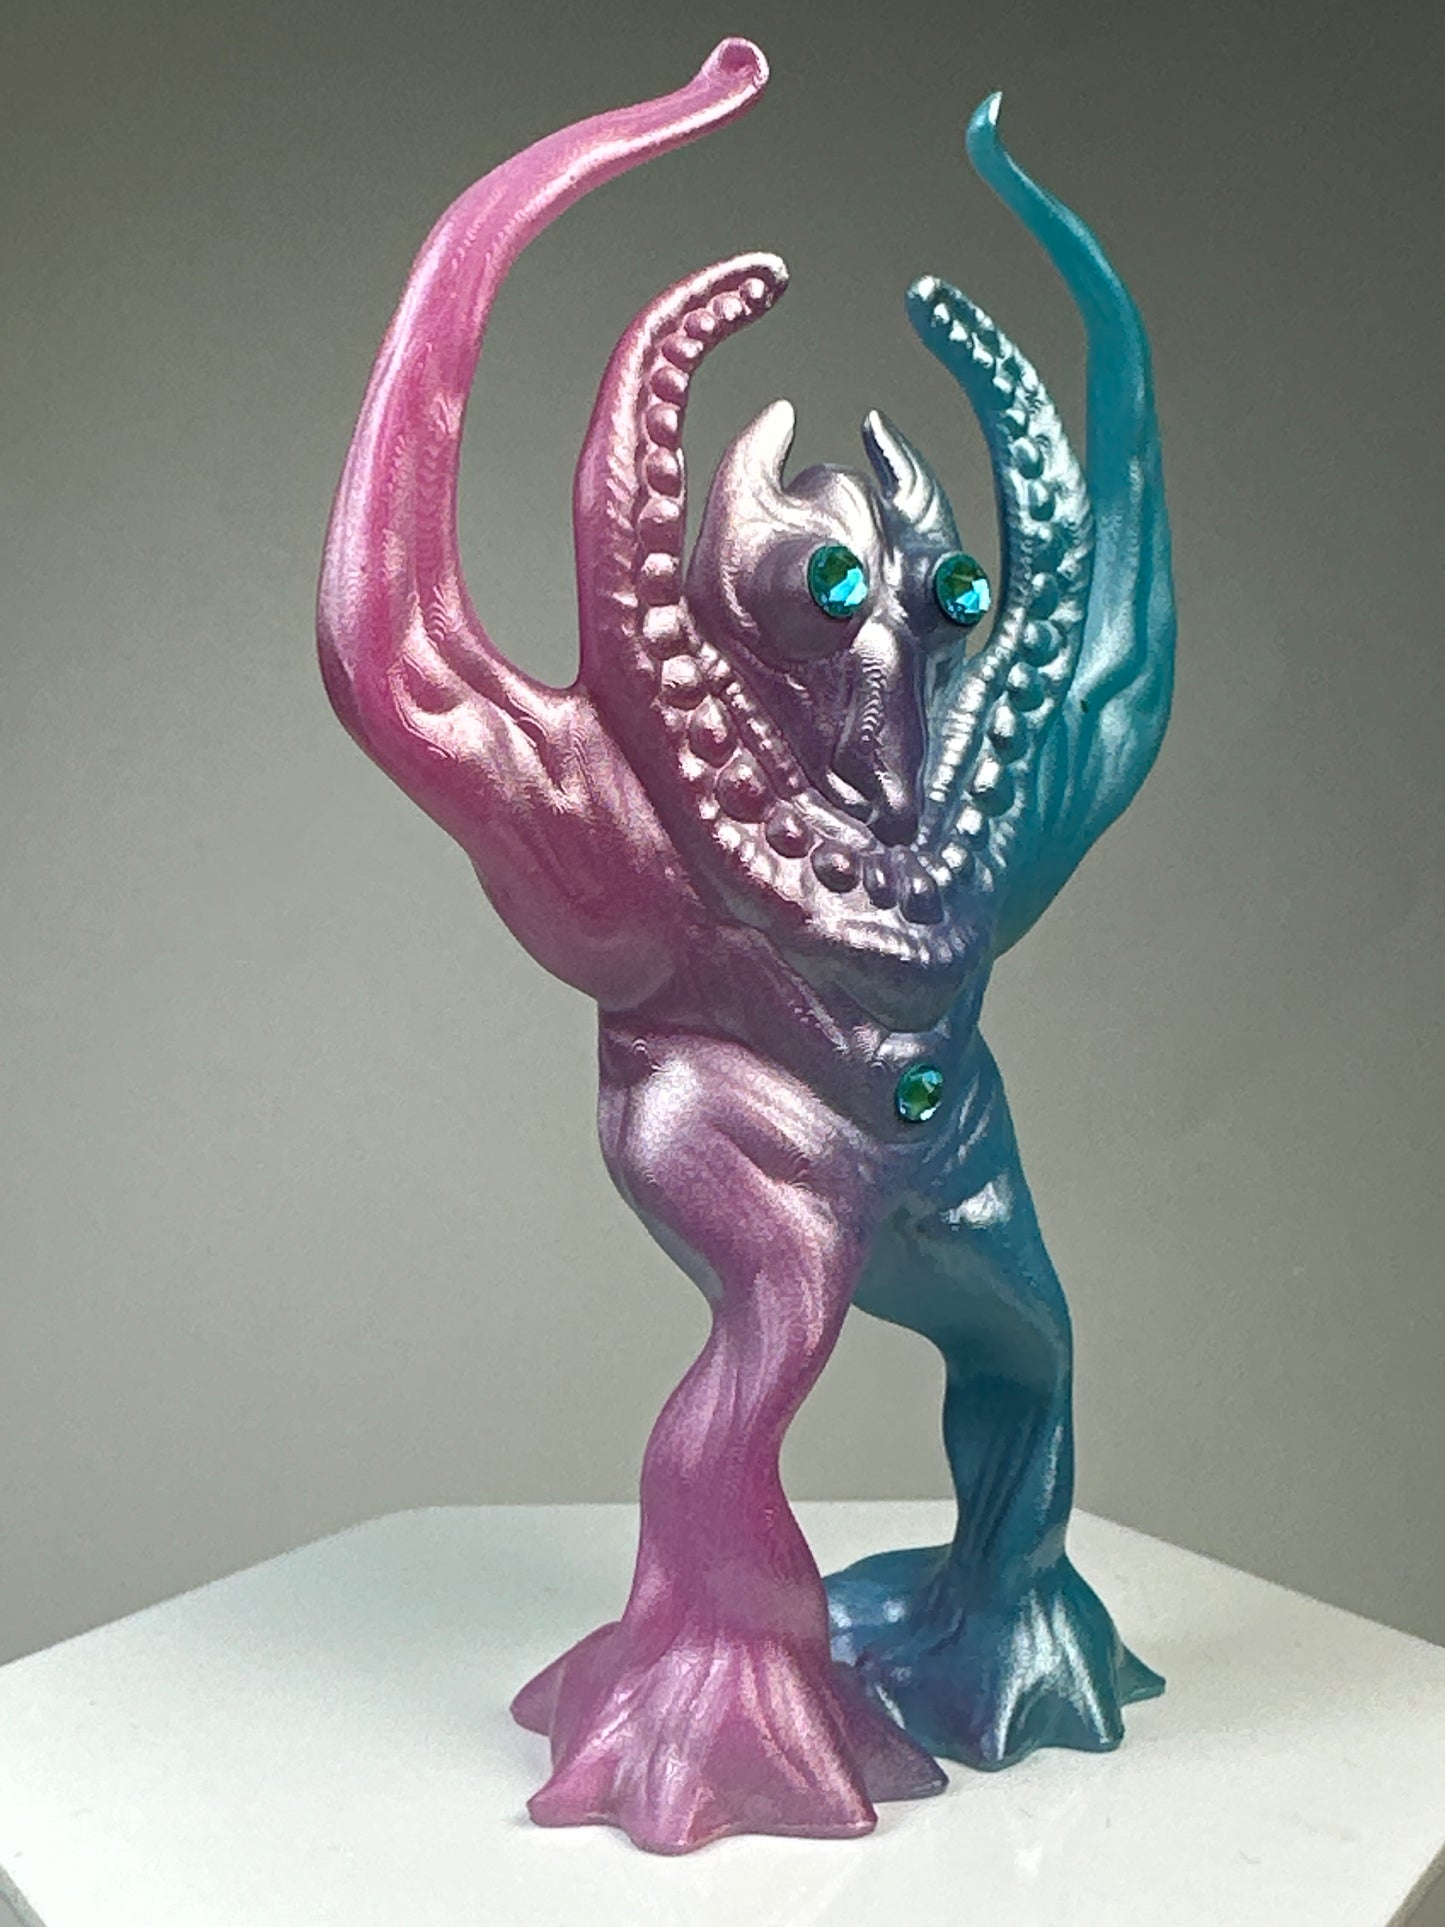 Sammy Smiles: Pink and Blue Contortions